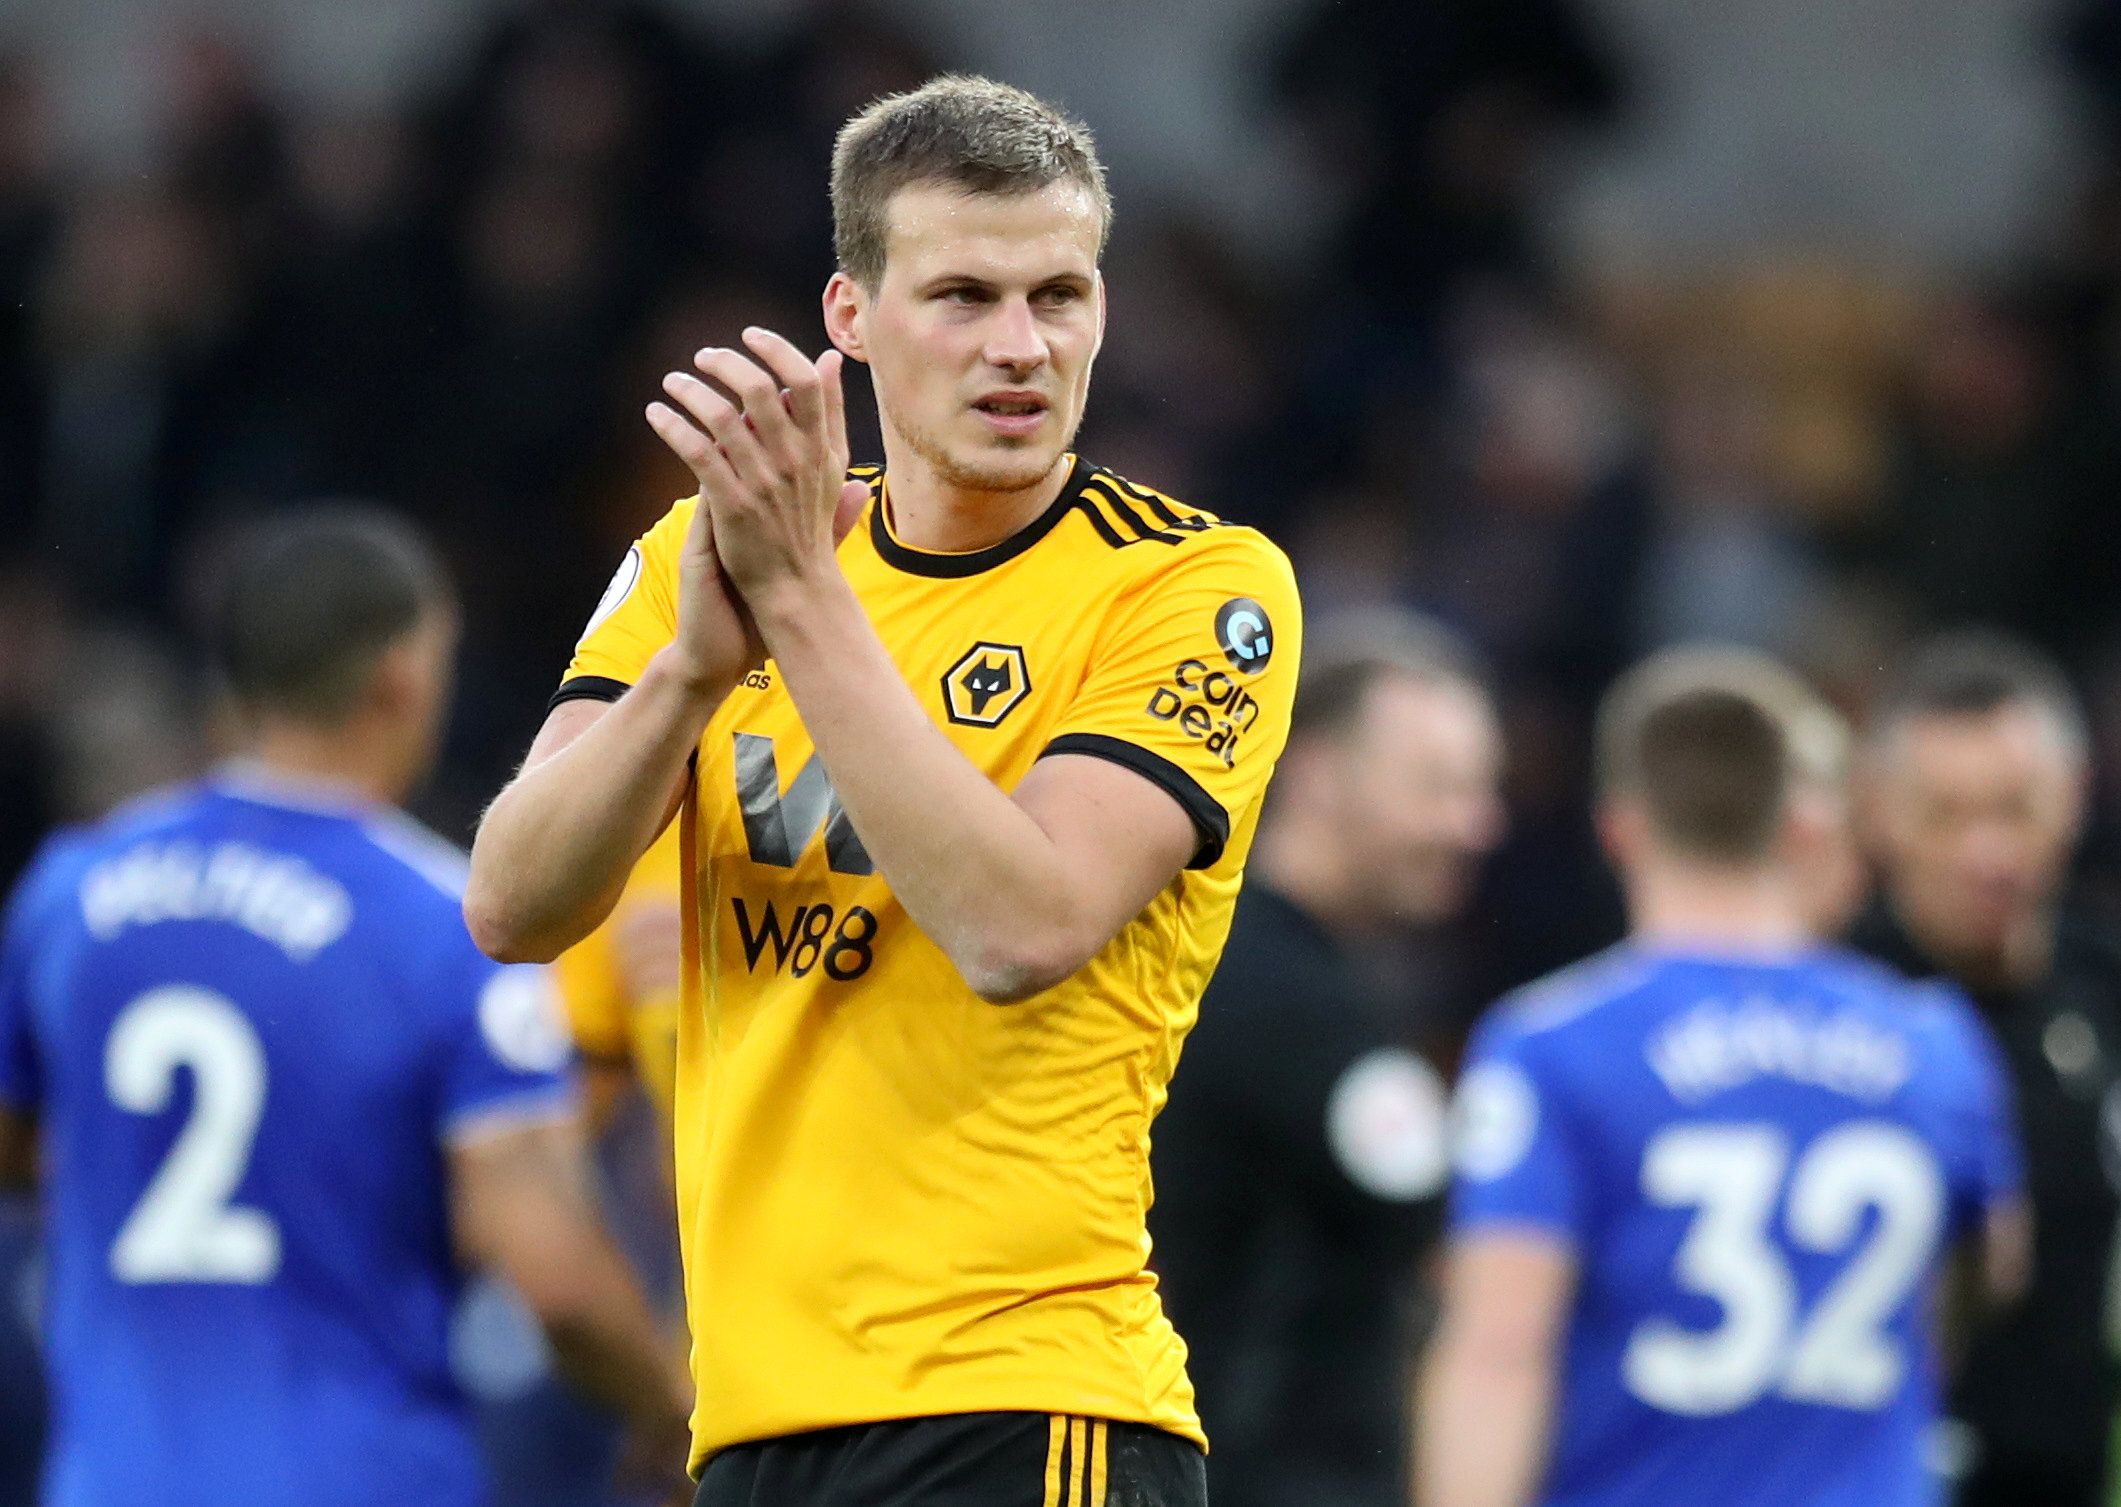 Soccer Football - Premier League - Wolverhampton Wanderers v Cardiff City - Molineux Stadium, Wolverhampton, Britain - March 2, 2019  Wolverhampton Wanderers' Ryan Bennett applauds fans after the match                REUTERS/Jon Super  EDITORIAL USE ONLY. No use with unauthorized audio, video, data, fixture lists, club/league logos or 